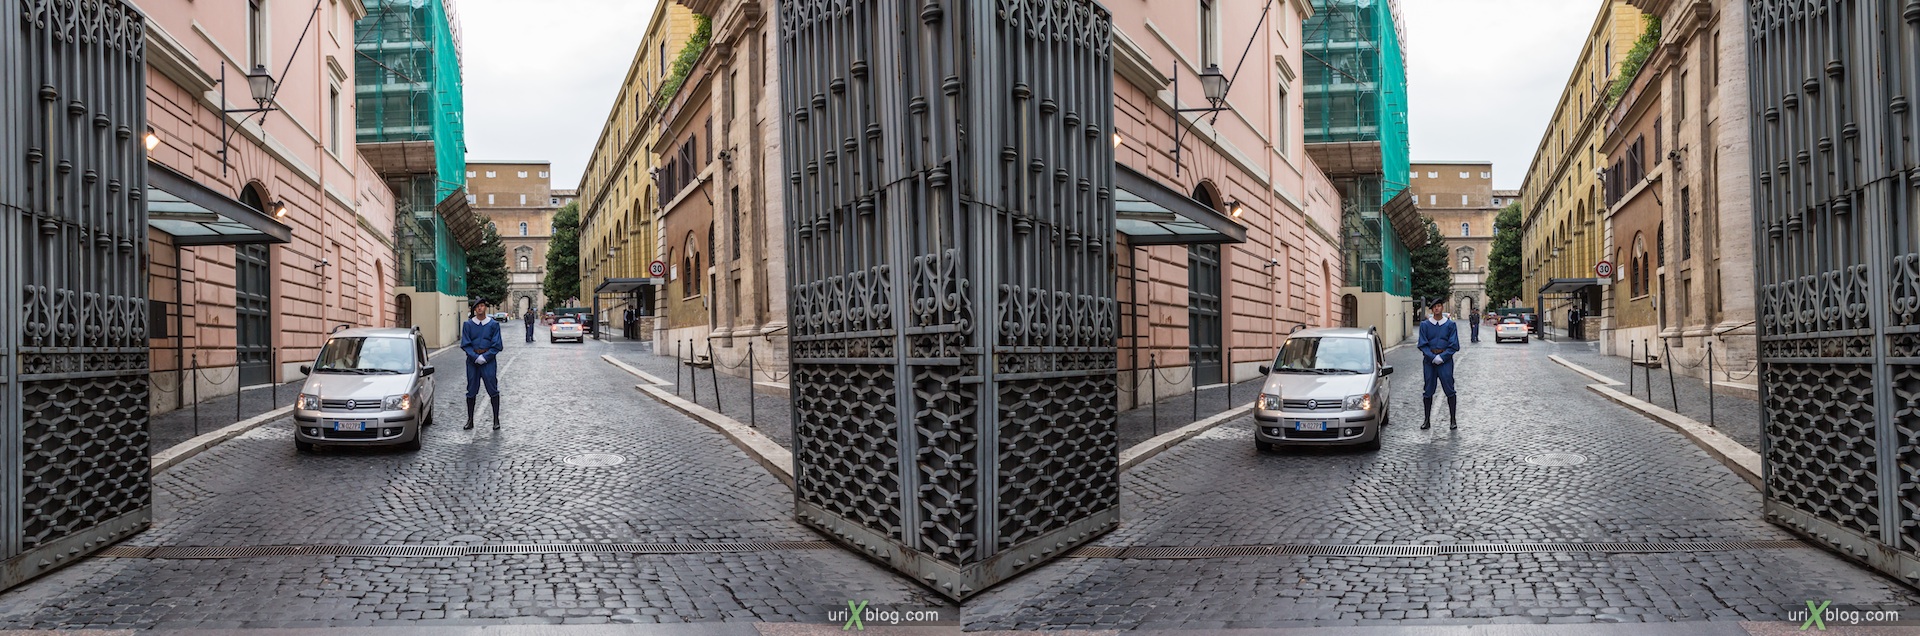 2012, Vatican, Rome, Italy, 3D, stereo pair, cross-eyed, crossview, cross view stereo pair